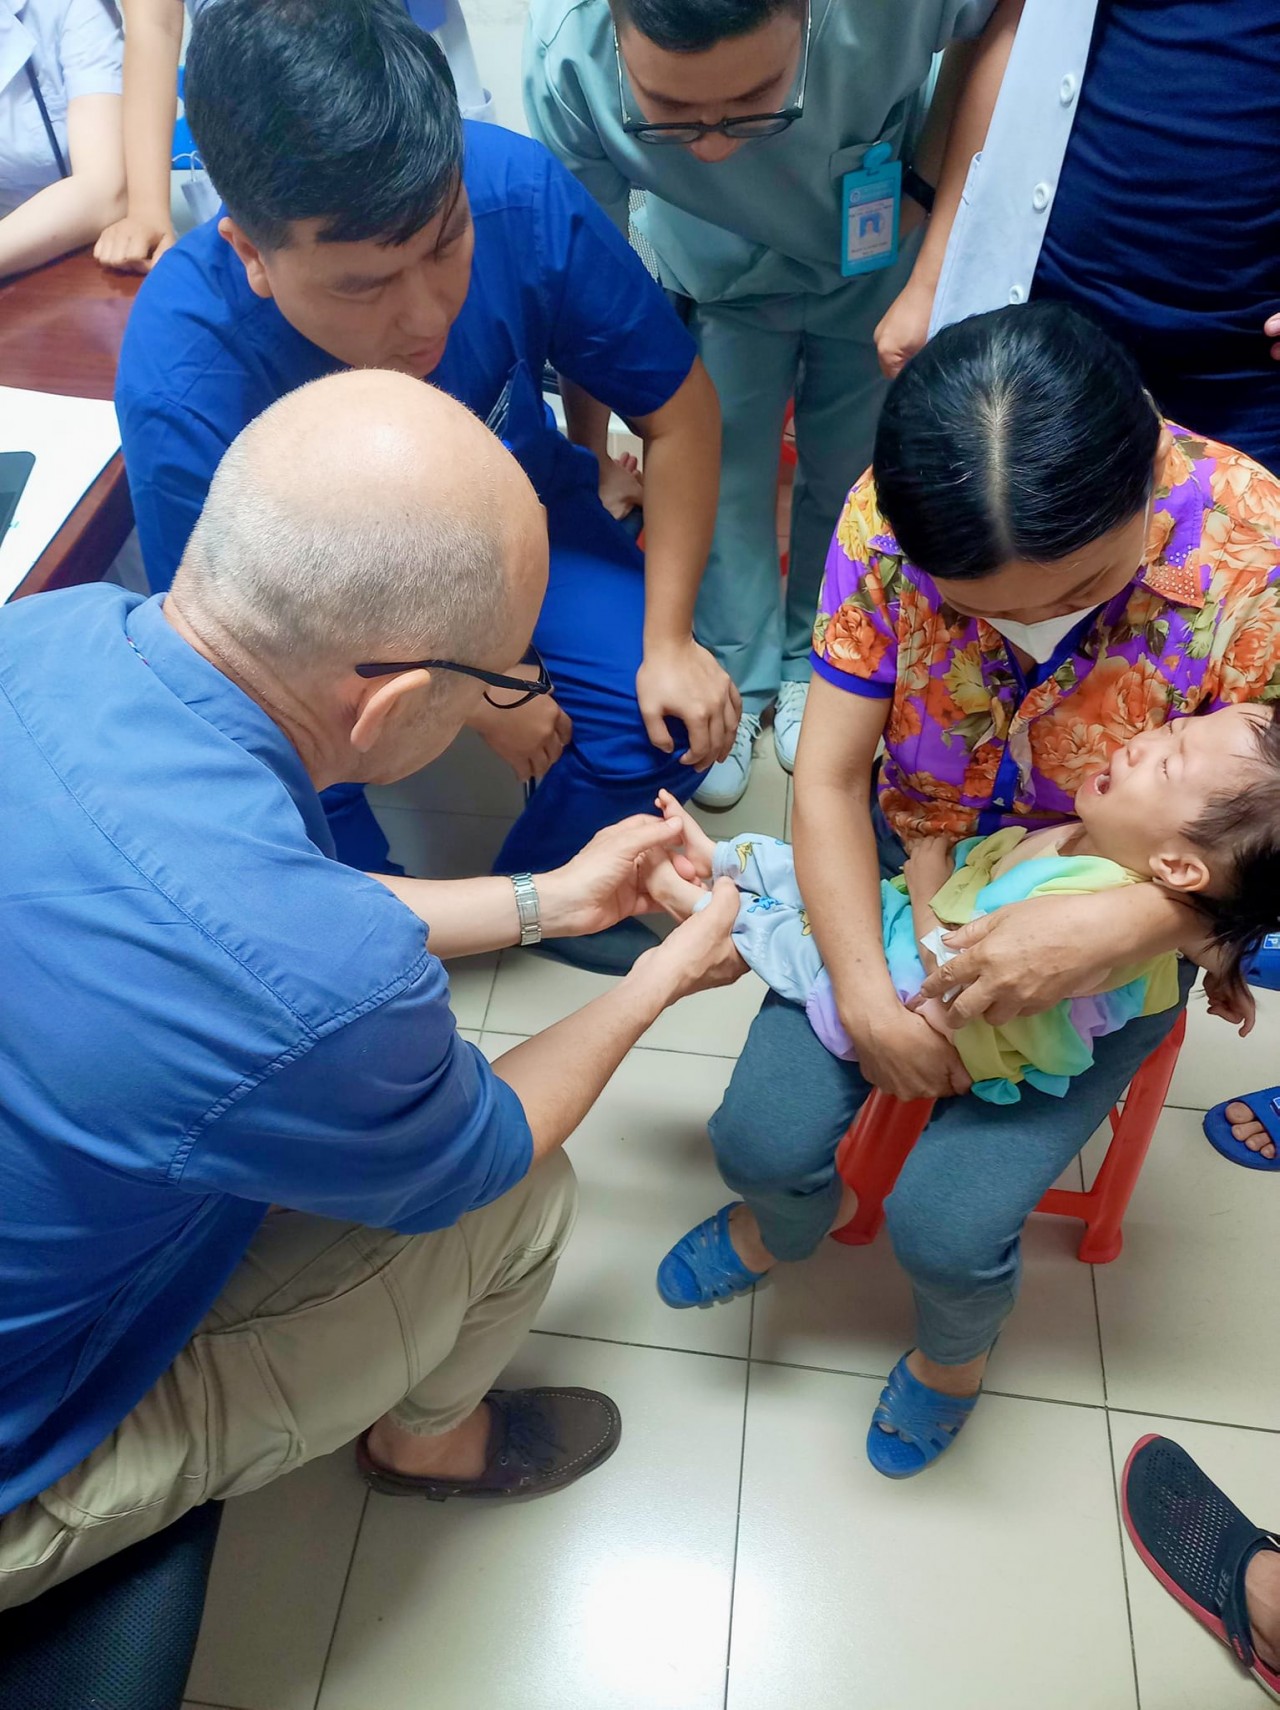 Experts from the Children Action Foundation and doctors of Hanoi-based Xanh Pon Hospital are providing check-ups  for children with congenital musculoskeletal disorders. Source: Nguyen Thuong